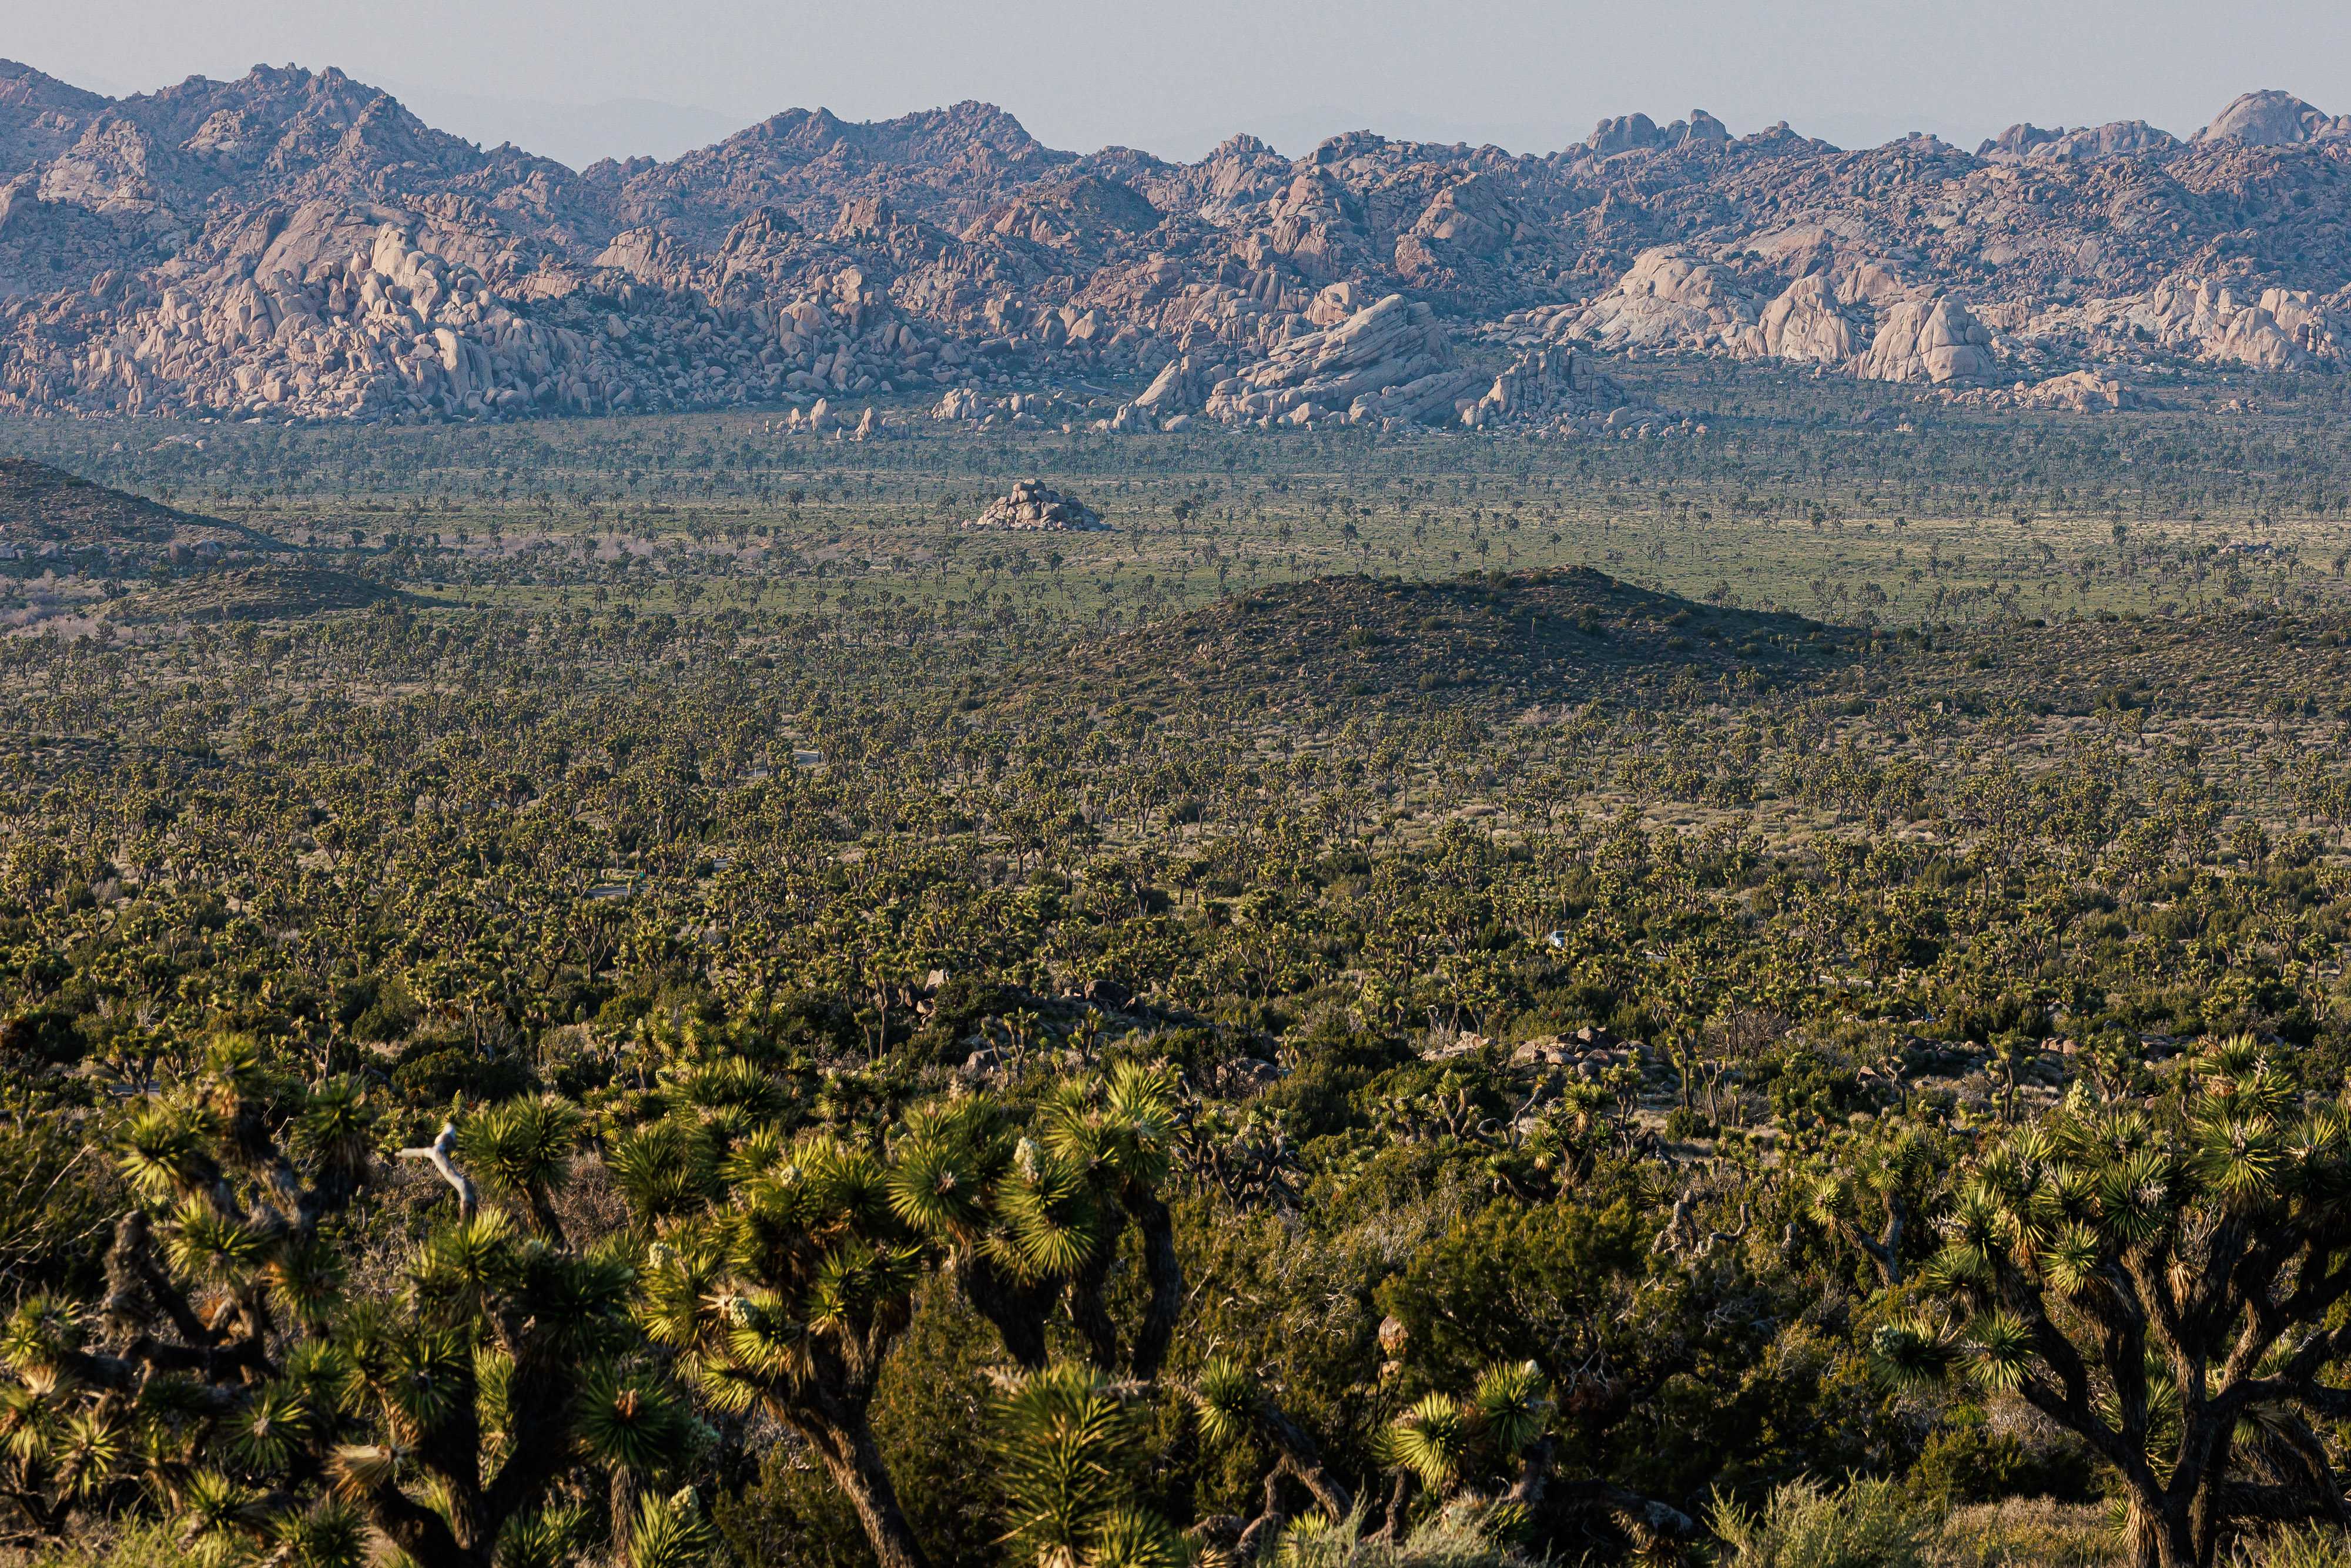 Looking across a vast scene where the desert floor stretches into the distance before rising into rocky mountains. The flat desert is a rich green, punctured by many tall, spiky joshua trees and countless other plants and bushes.